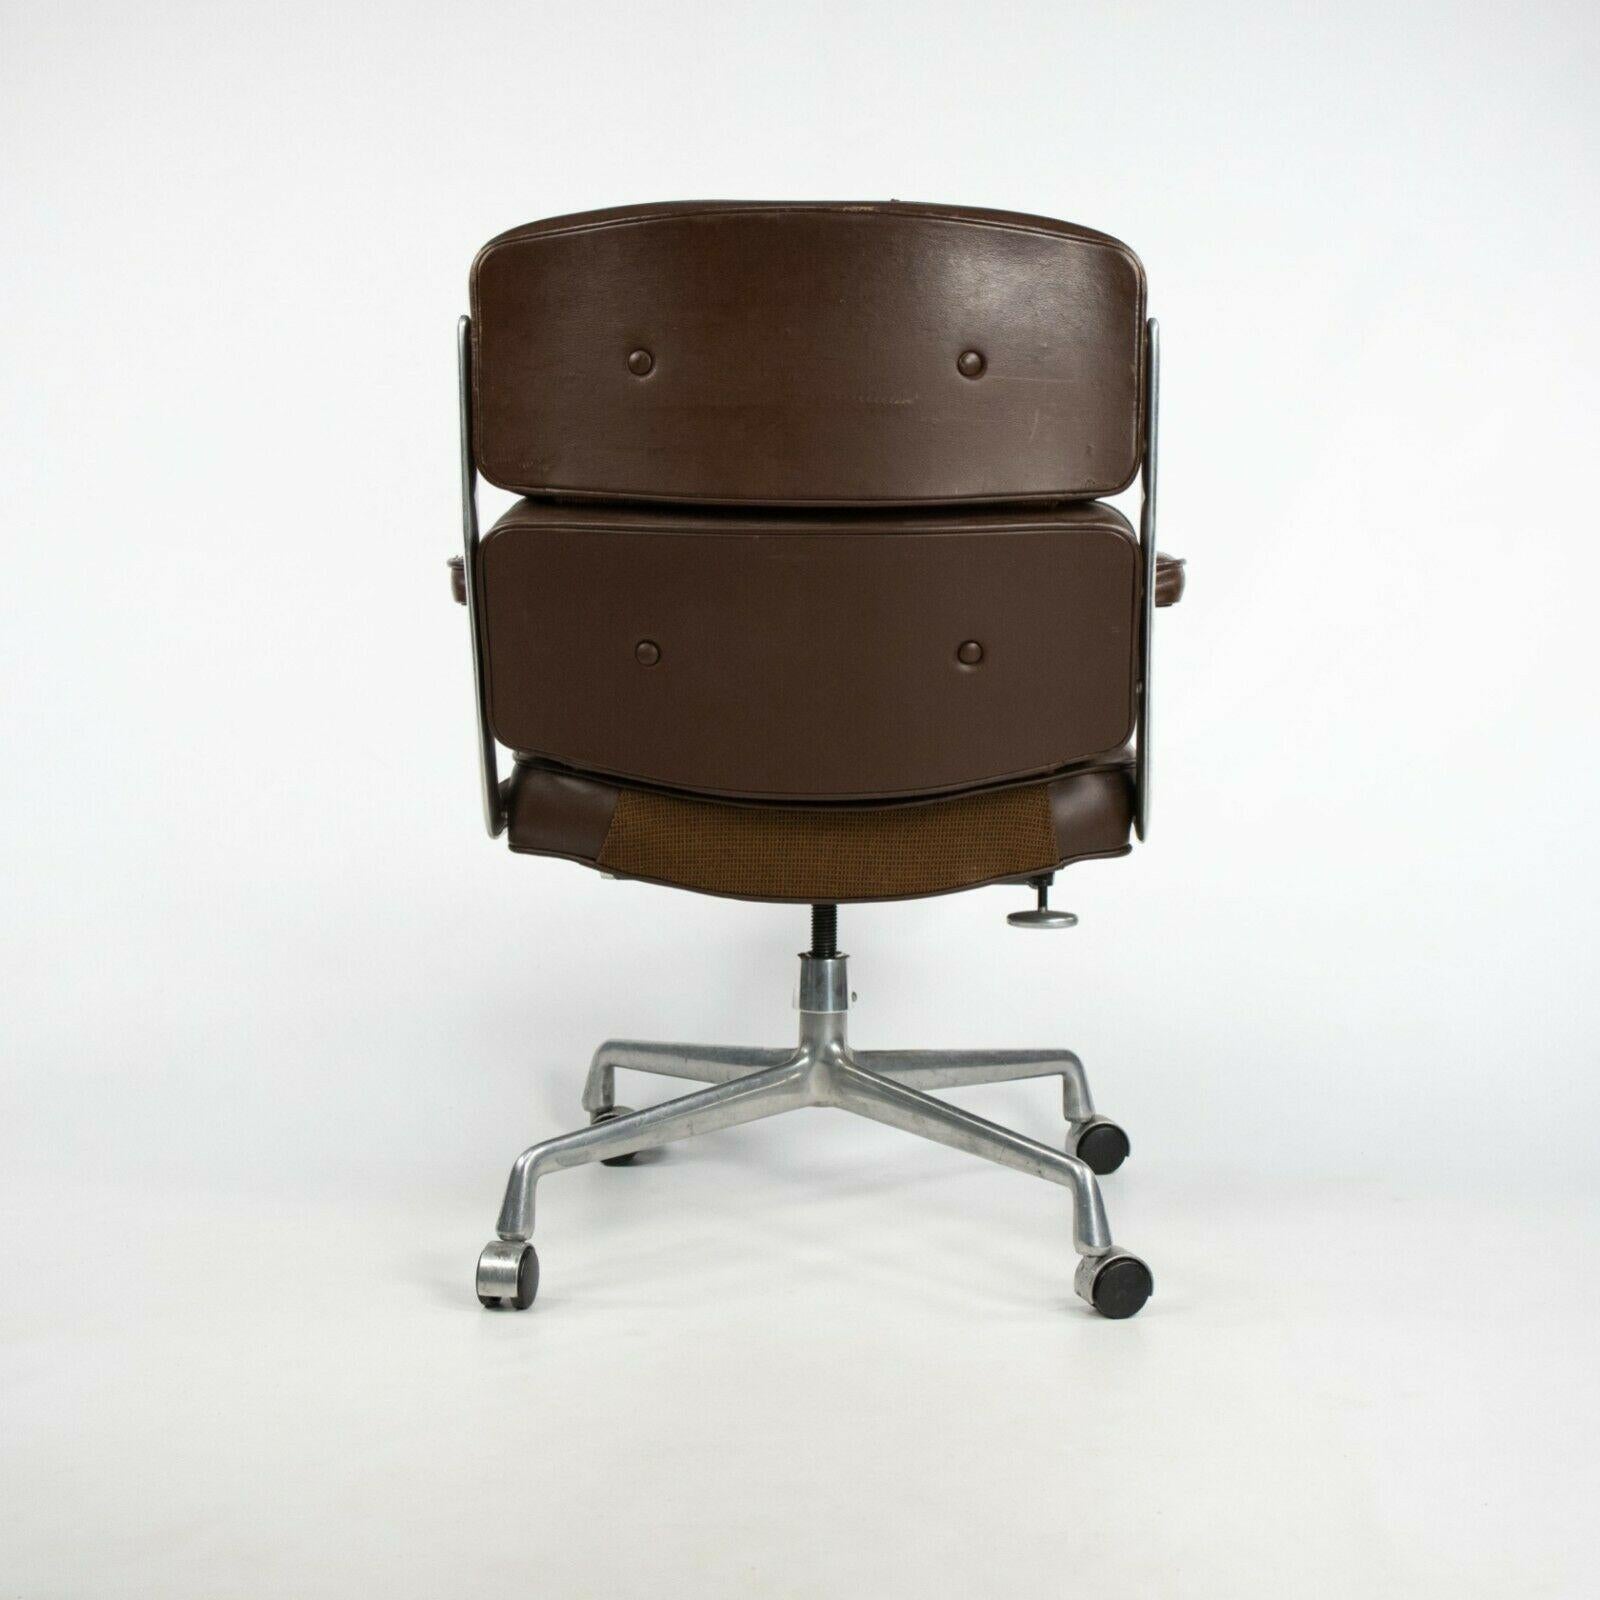 American 1989 Herman Miller Eames Time Life Executive Desk Chair in Brown Leather